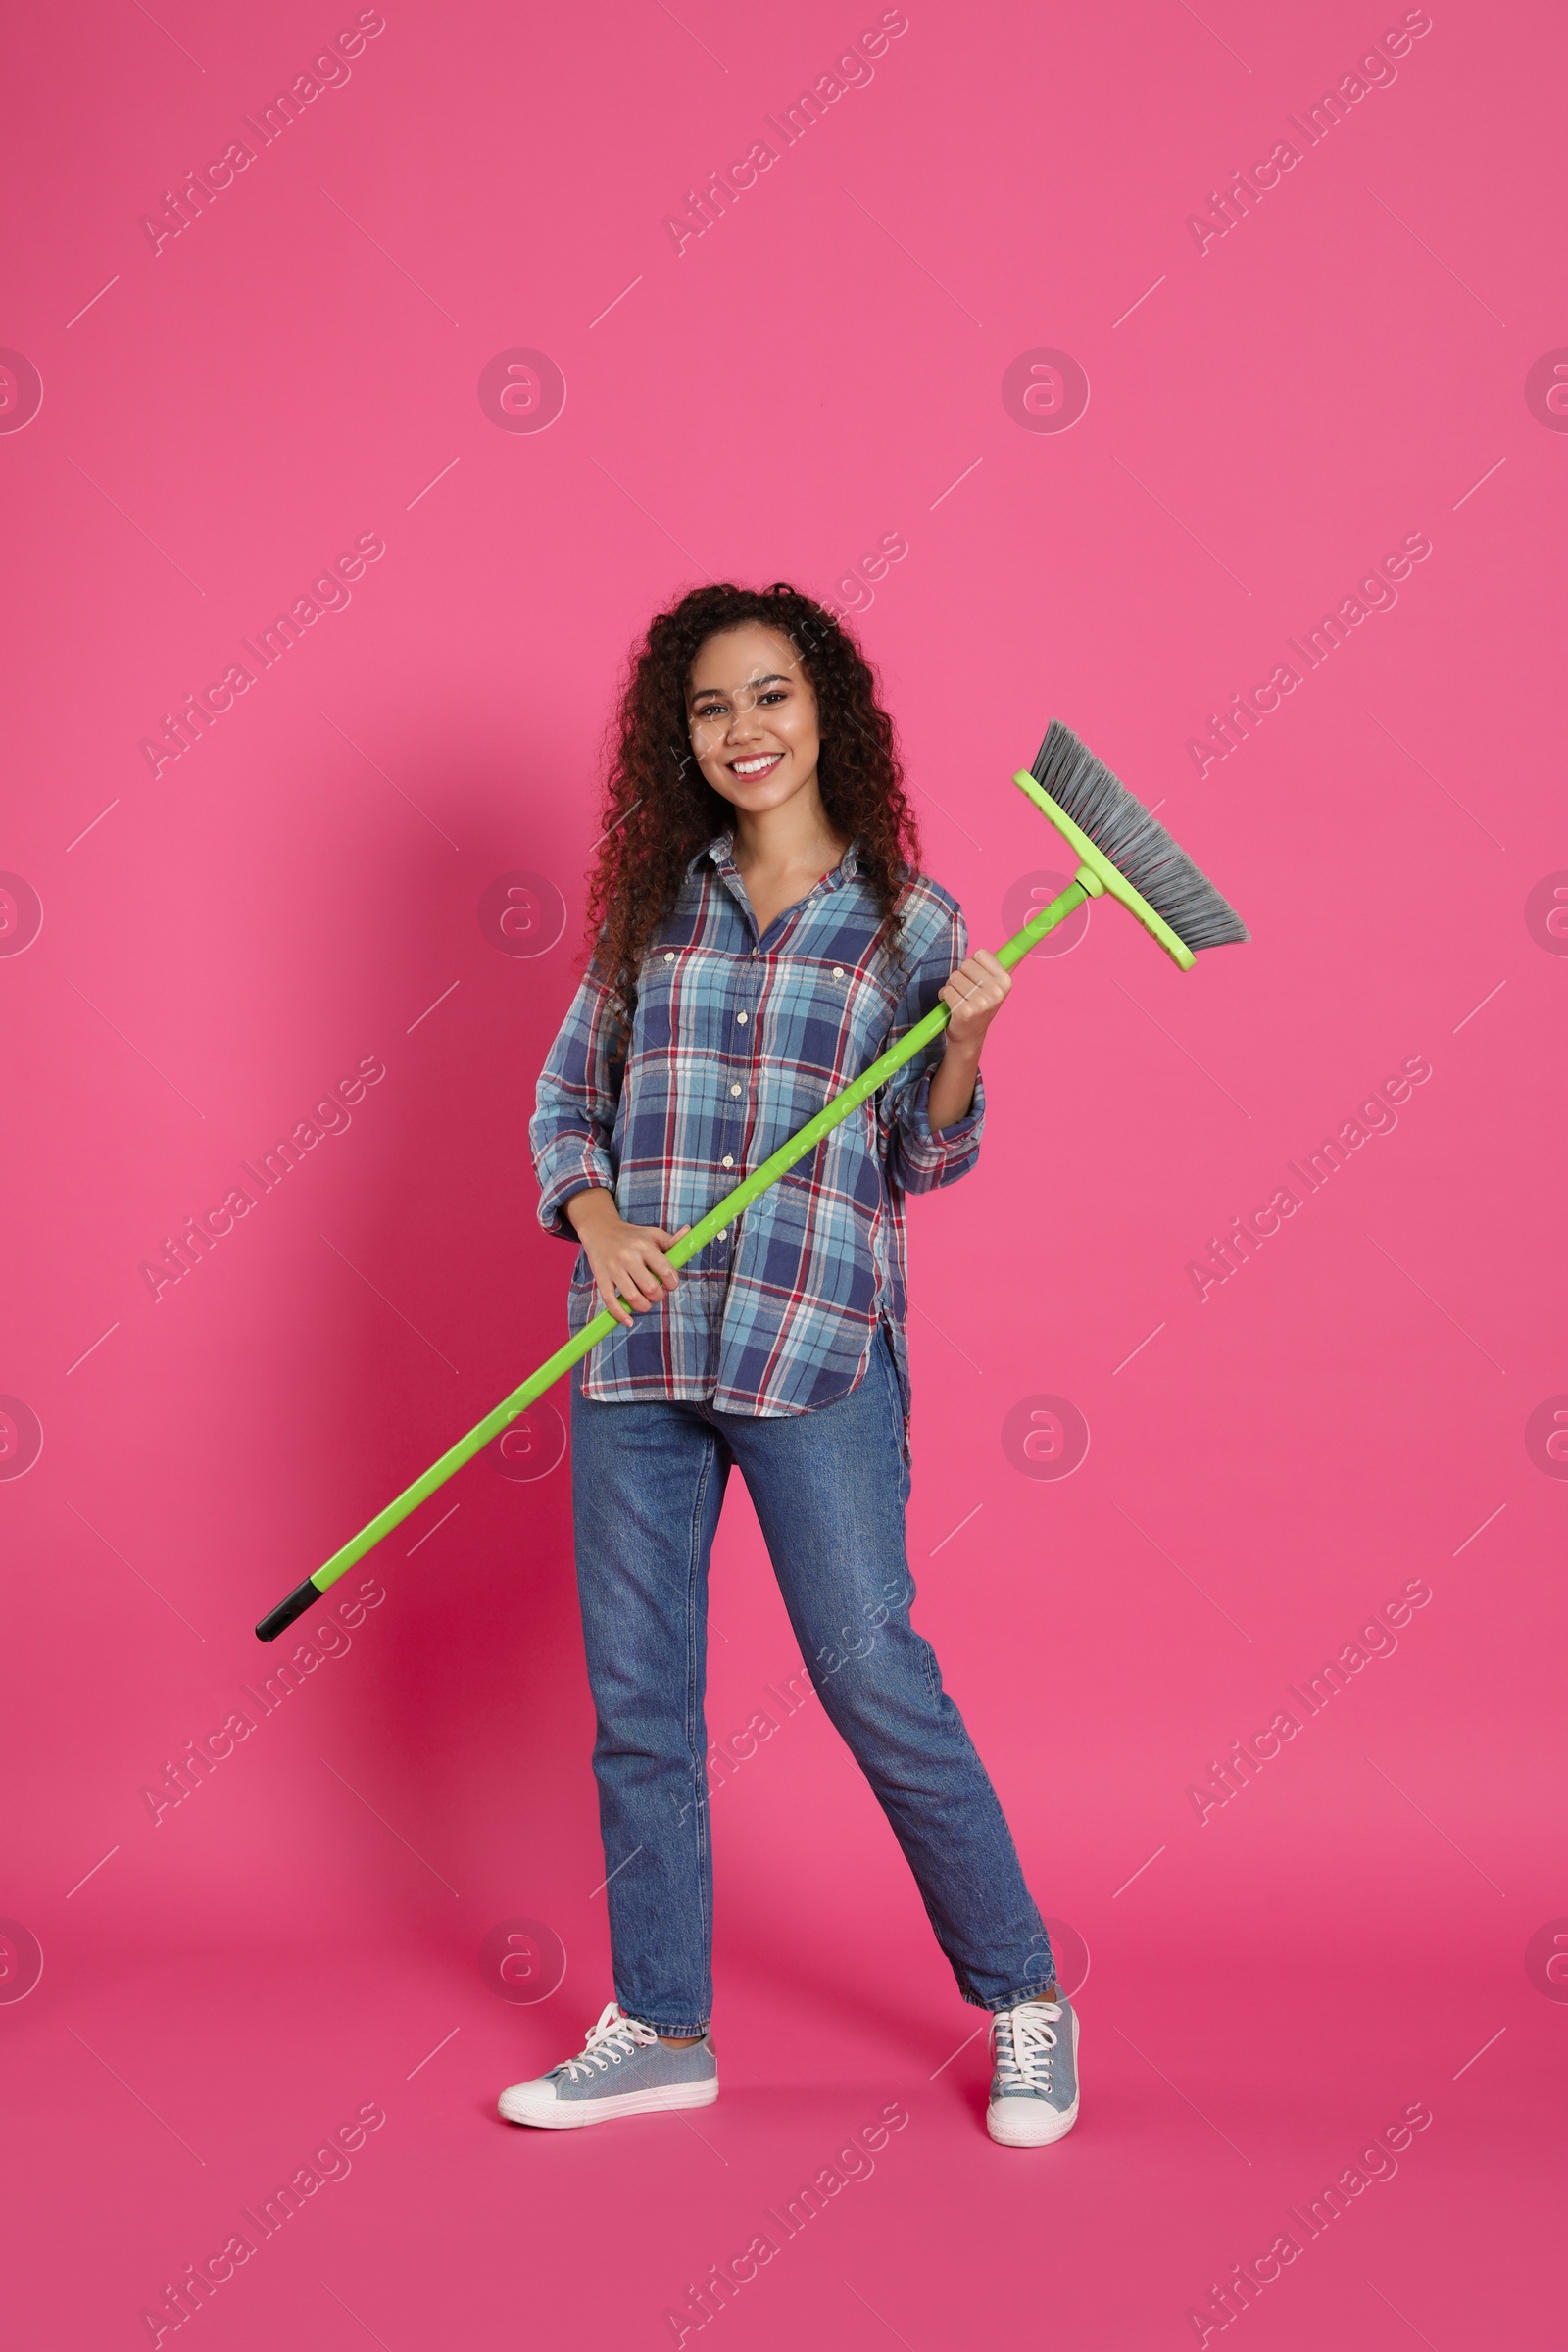 Photo of African American woman with green broom on pink background